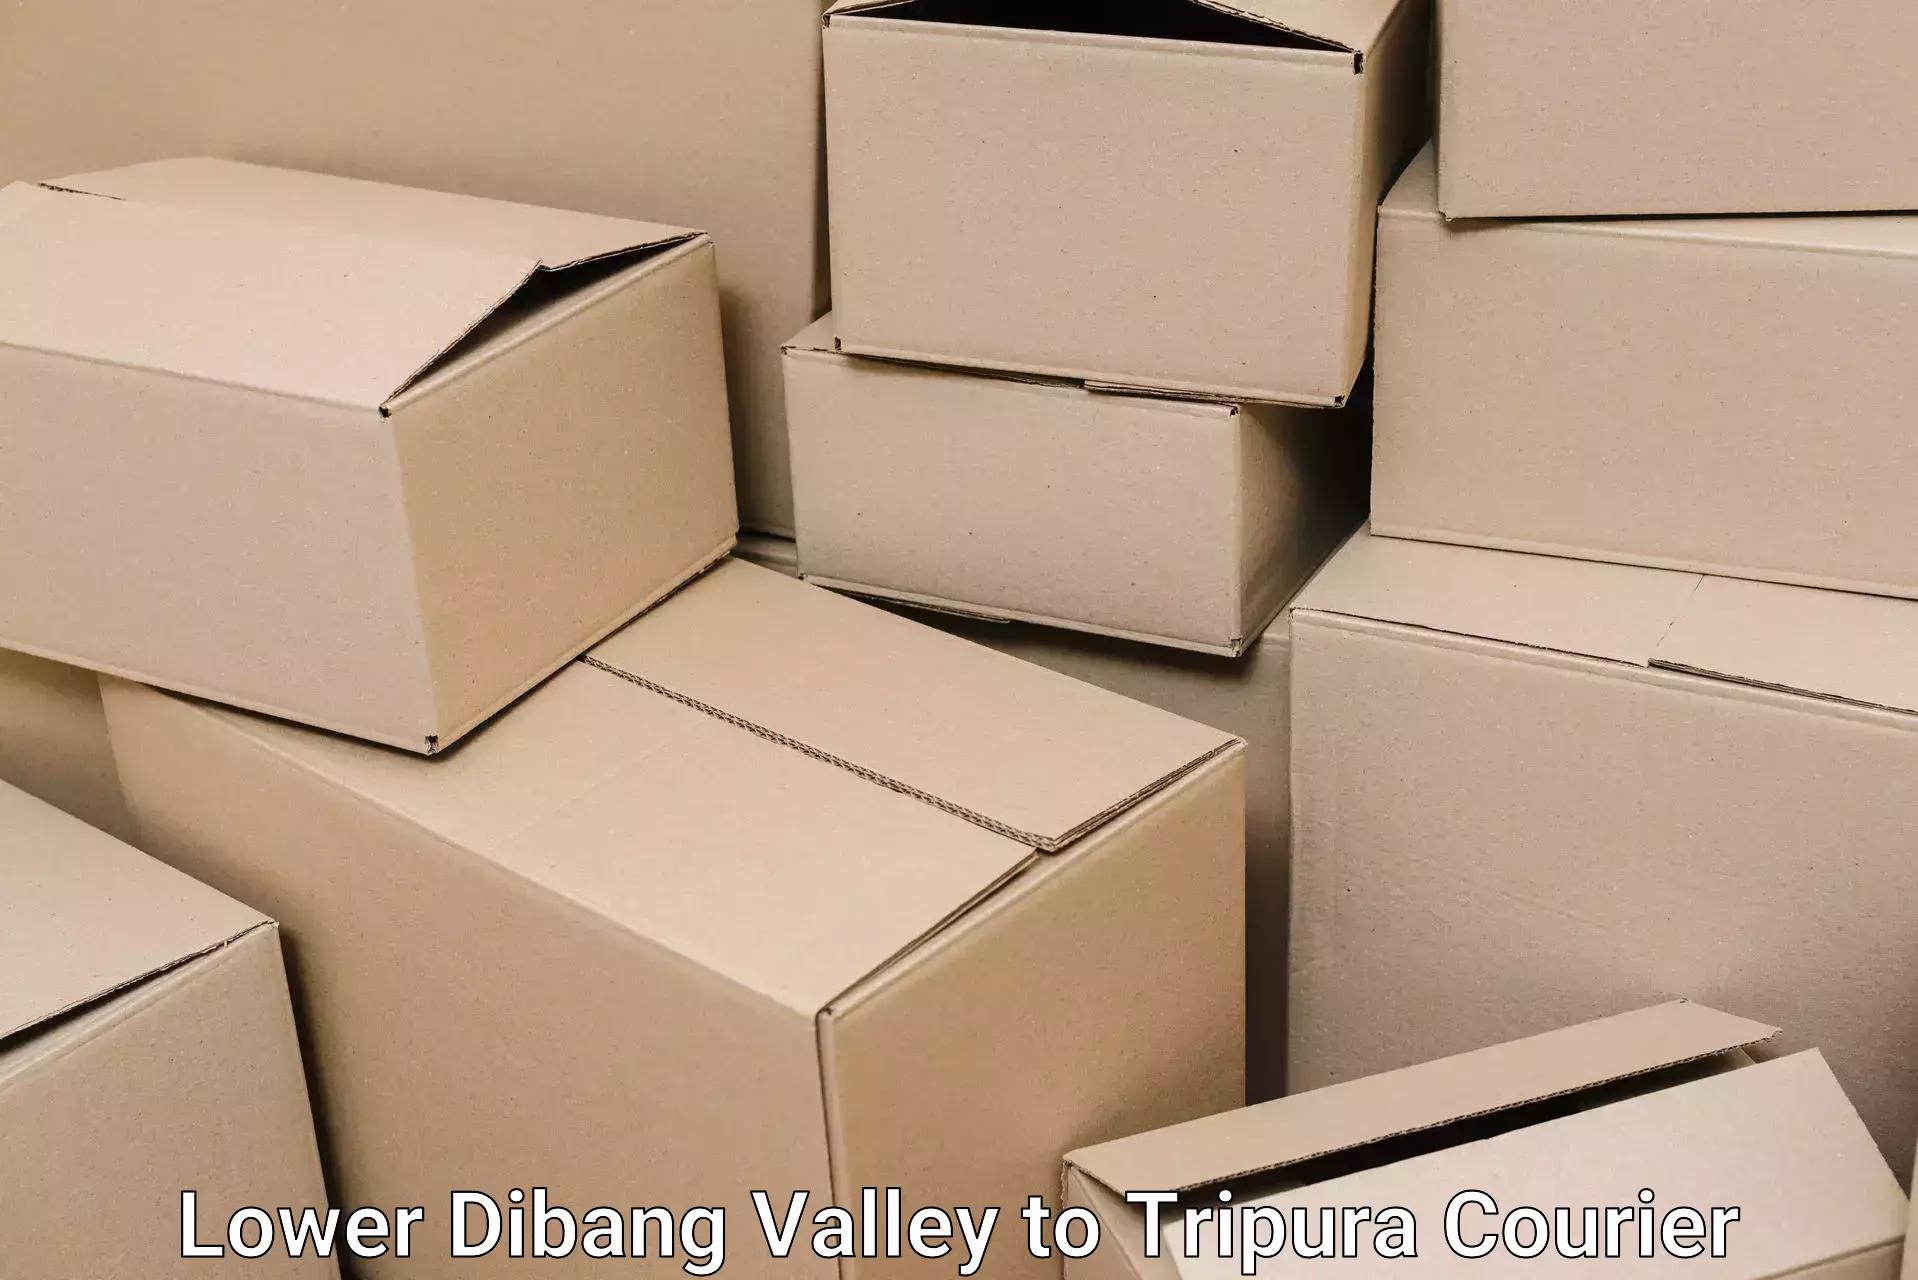 Trusted moving company in Lower Dibang Valley to West Tripura